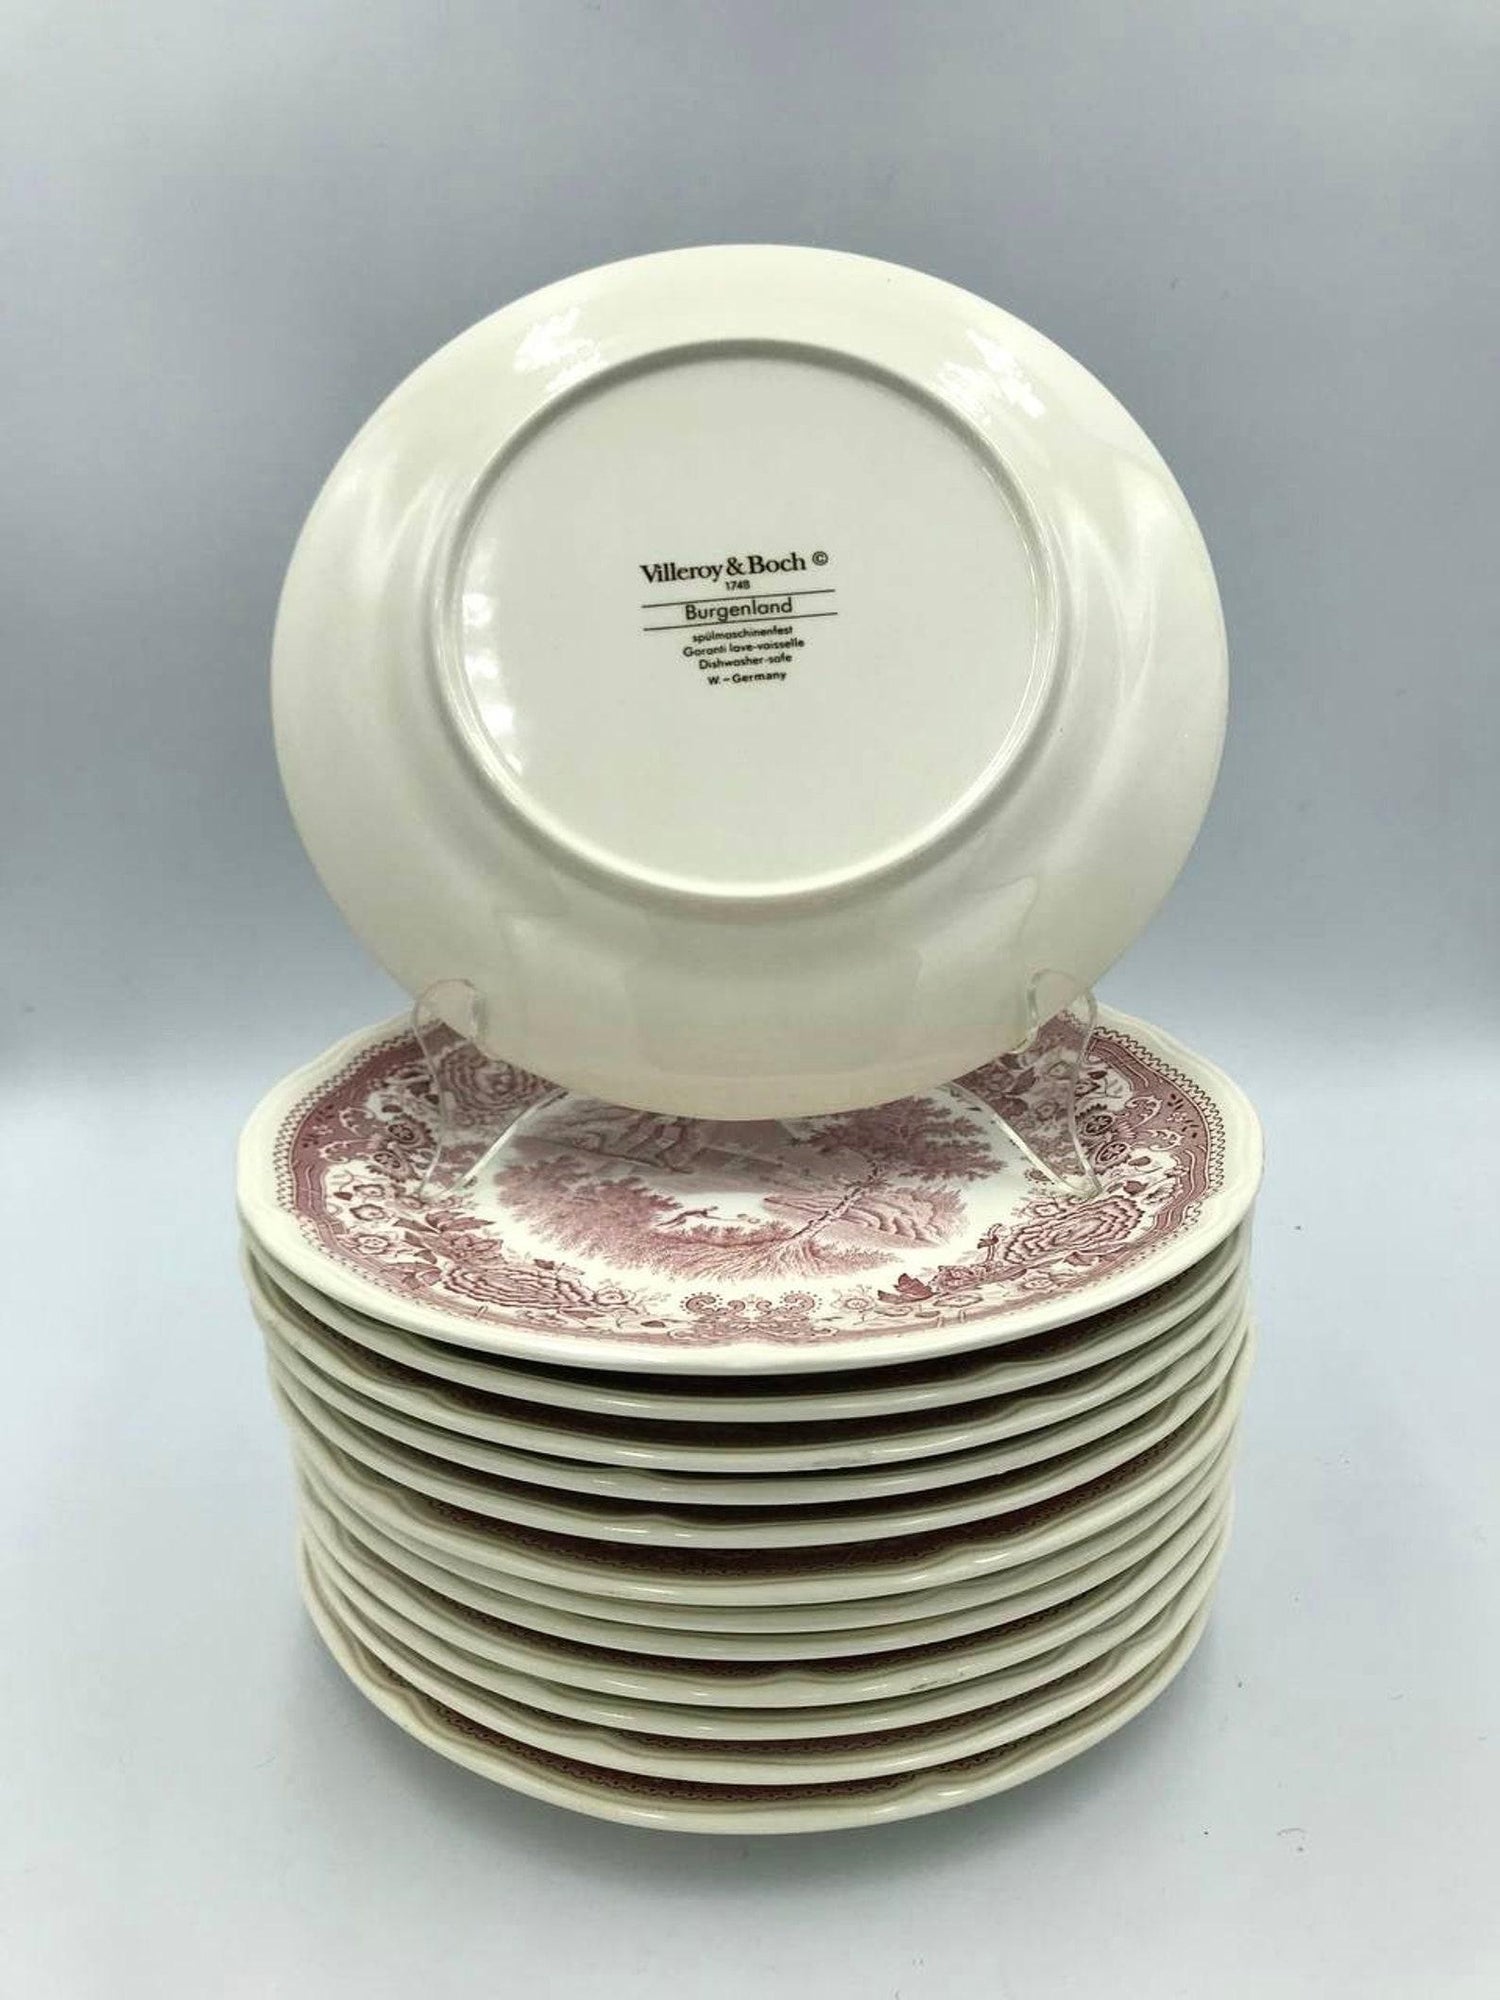 Villeroy and Boch Porcelain Dinner Plates, Burgenland Series, Germany For  Sale at 1stDibs